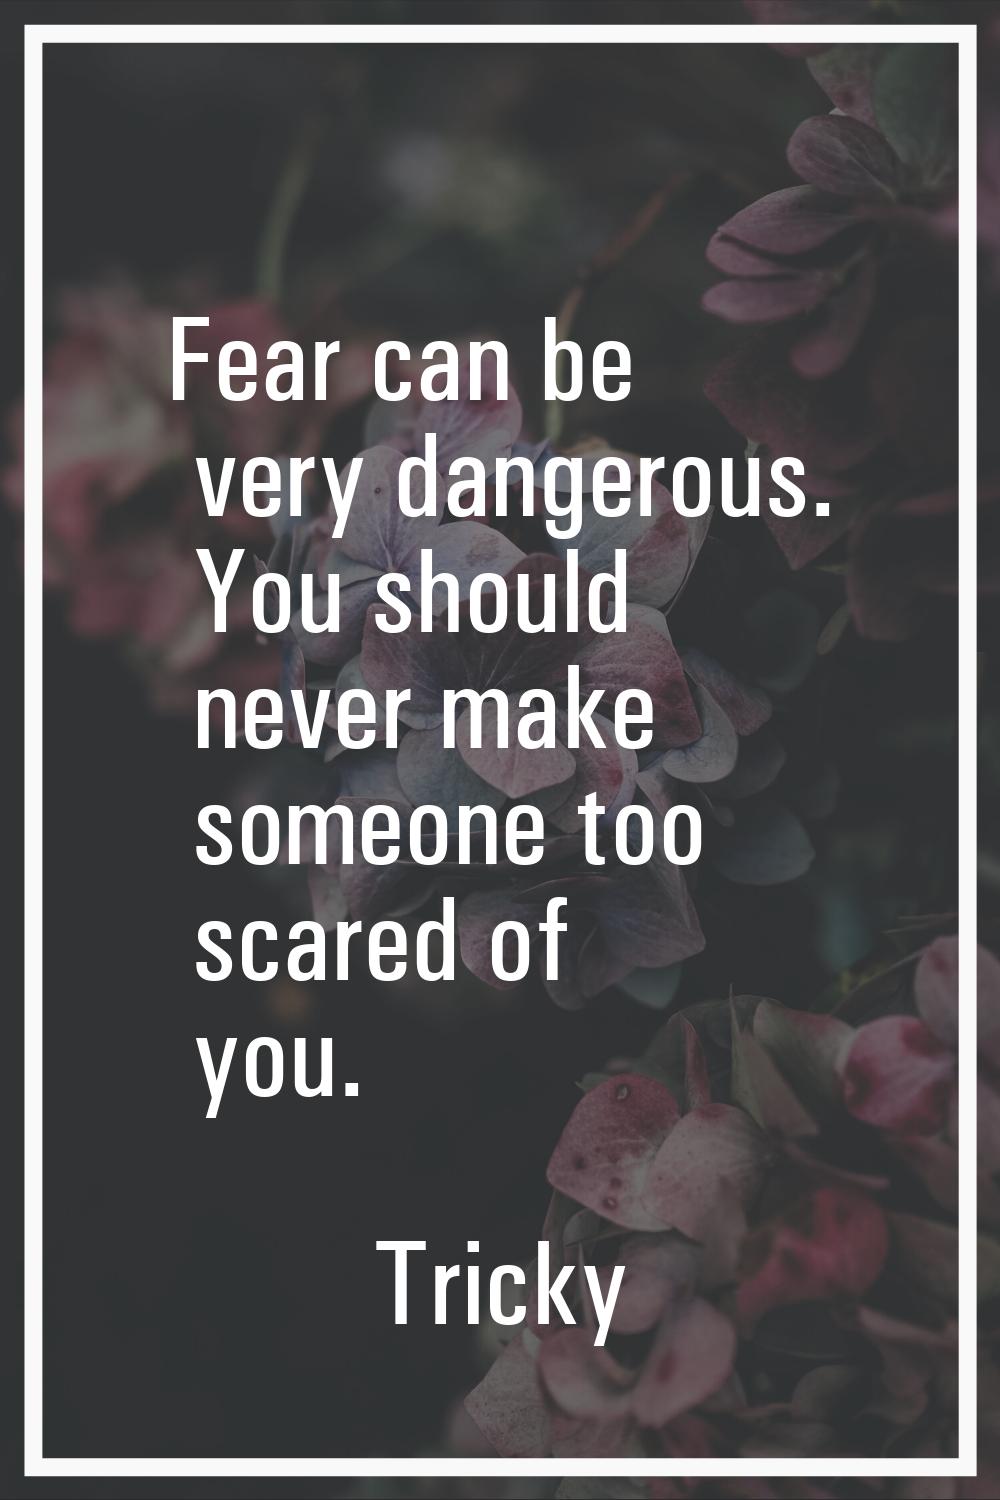 Fear can be very dangerous. You should never make someone too scared of you.